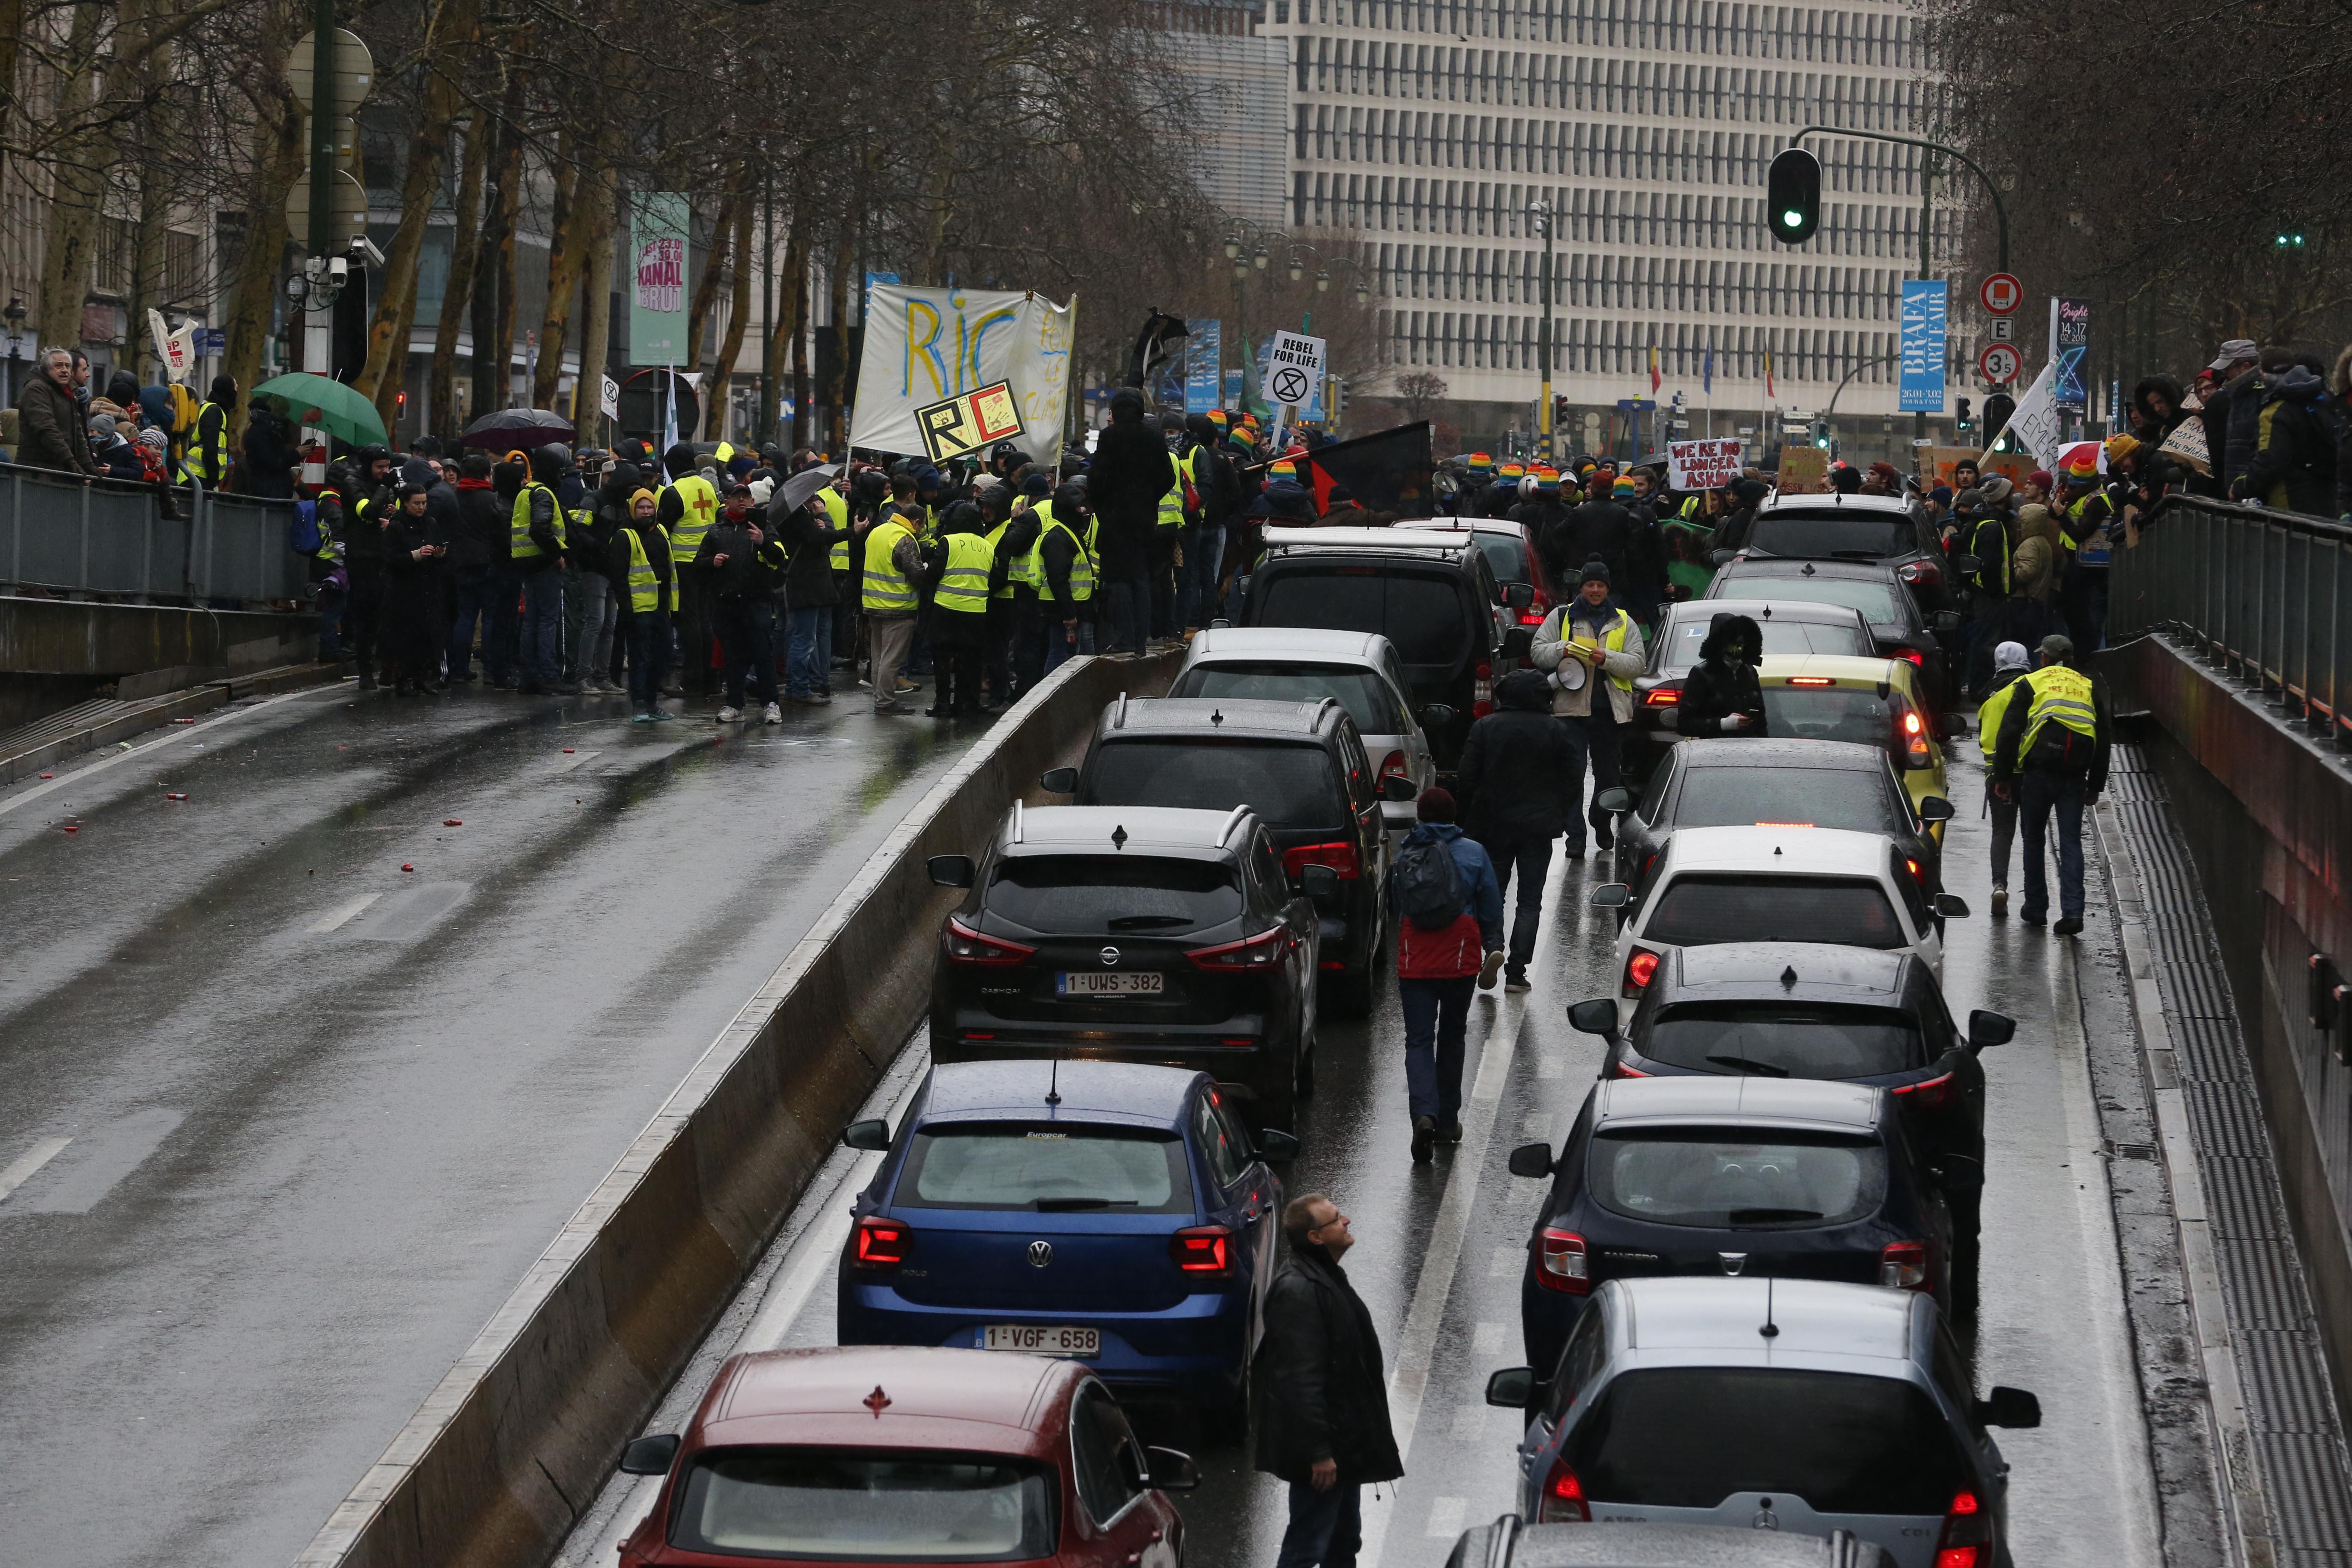 A traffic jam takes place outside a climate change awareness demonstration in Brussels.